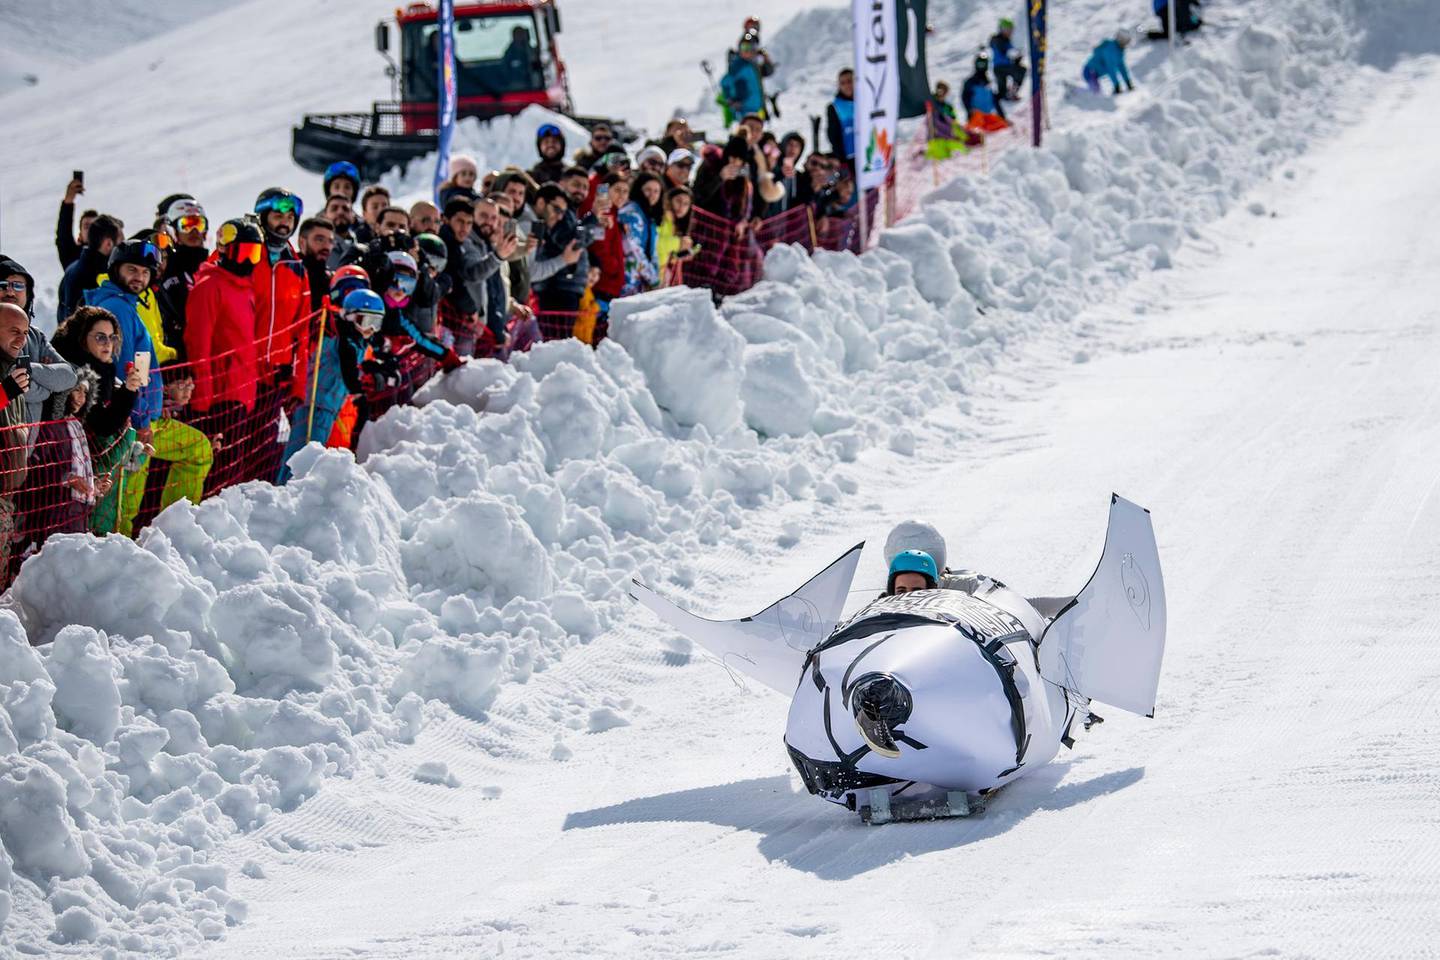 Competitor performs during Red Bull Jump and Freeze at Mzaar Ski Resort, Kfardebian, Lebanon on February 23, 2019 // Akl Yazbeck / Red Bull Content Pool // SI201902250258 // Usage for editorial use only // 